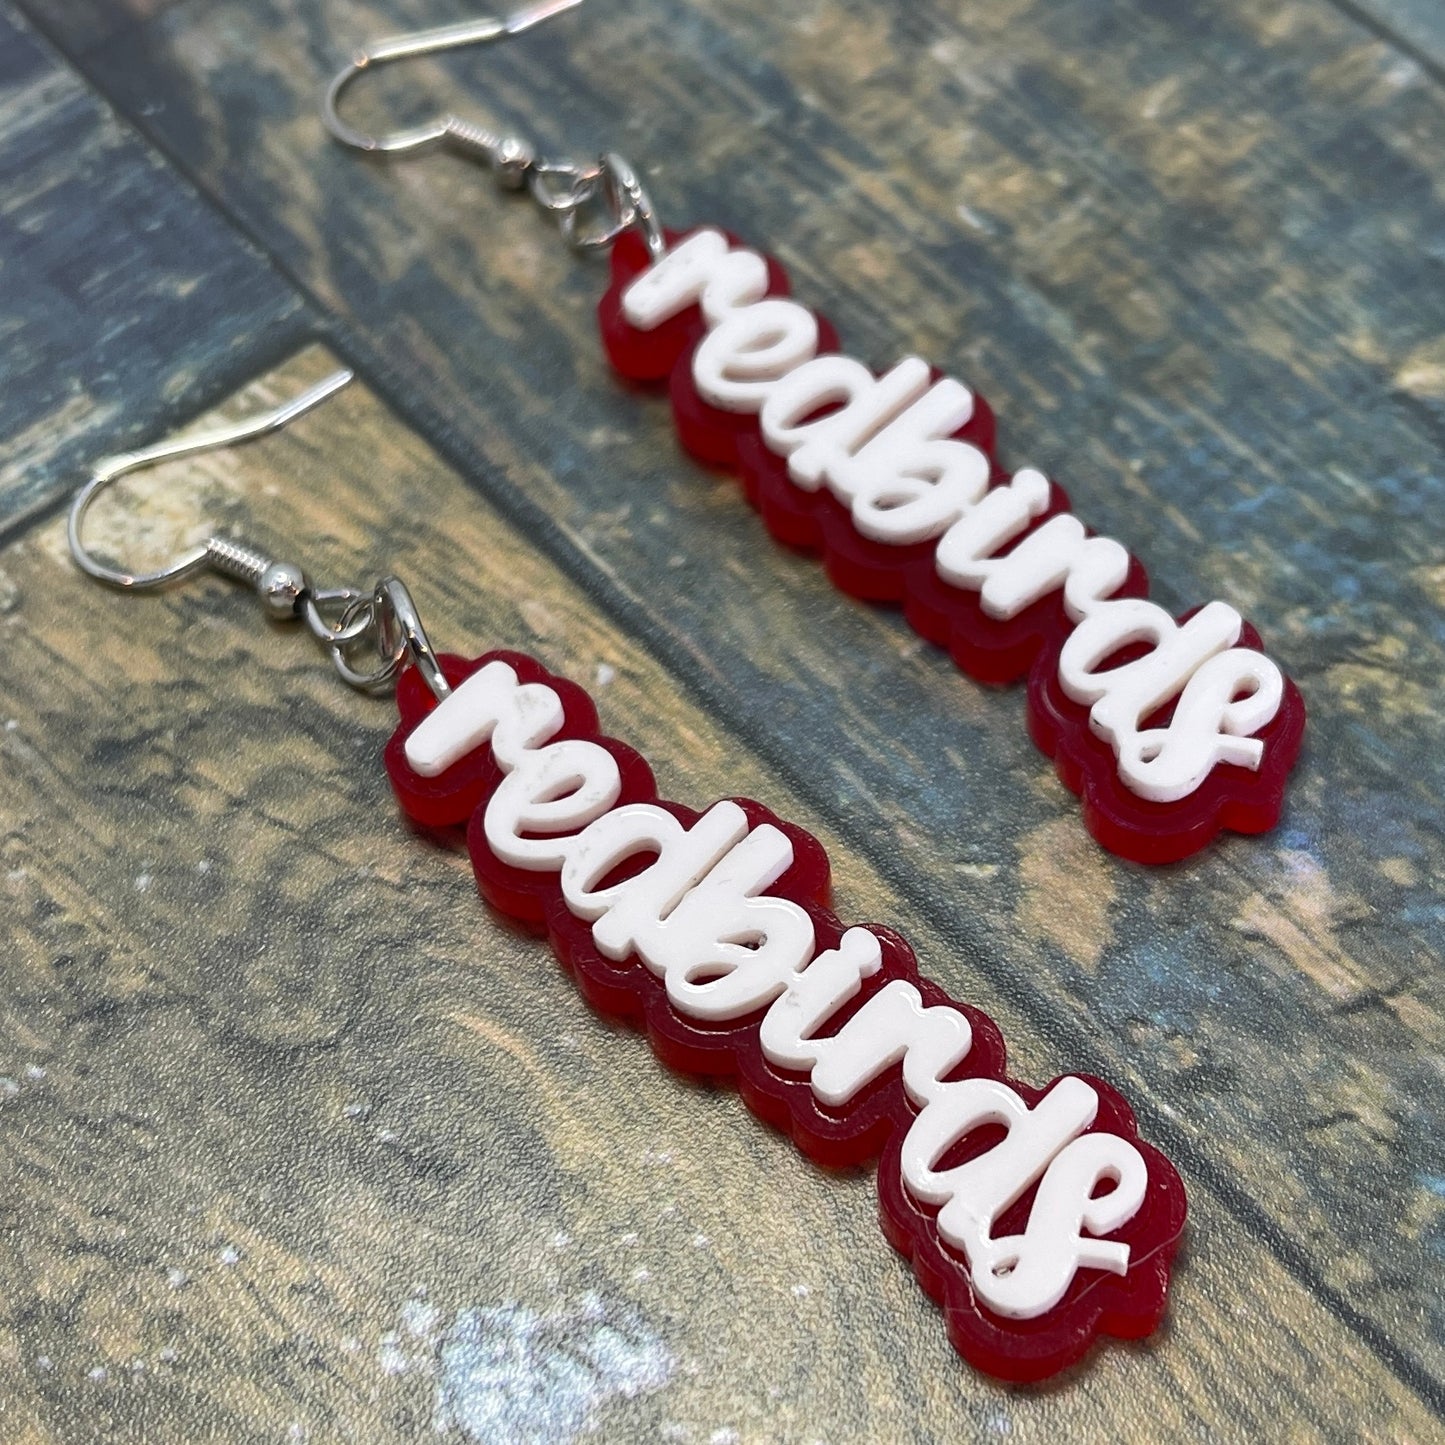 De Pere Redbirds Earrings - Candy Apple Red and White